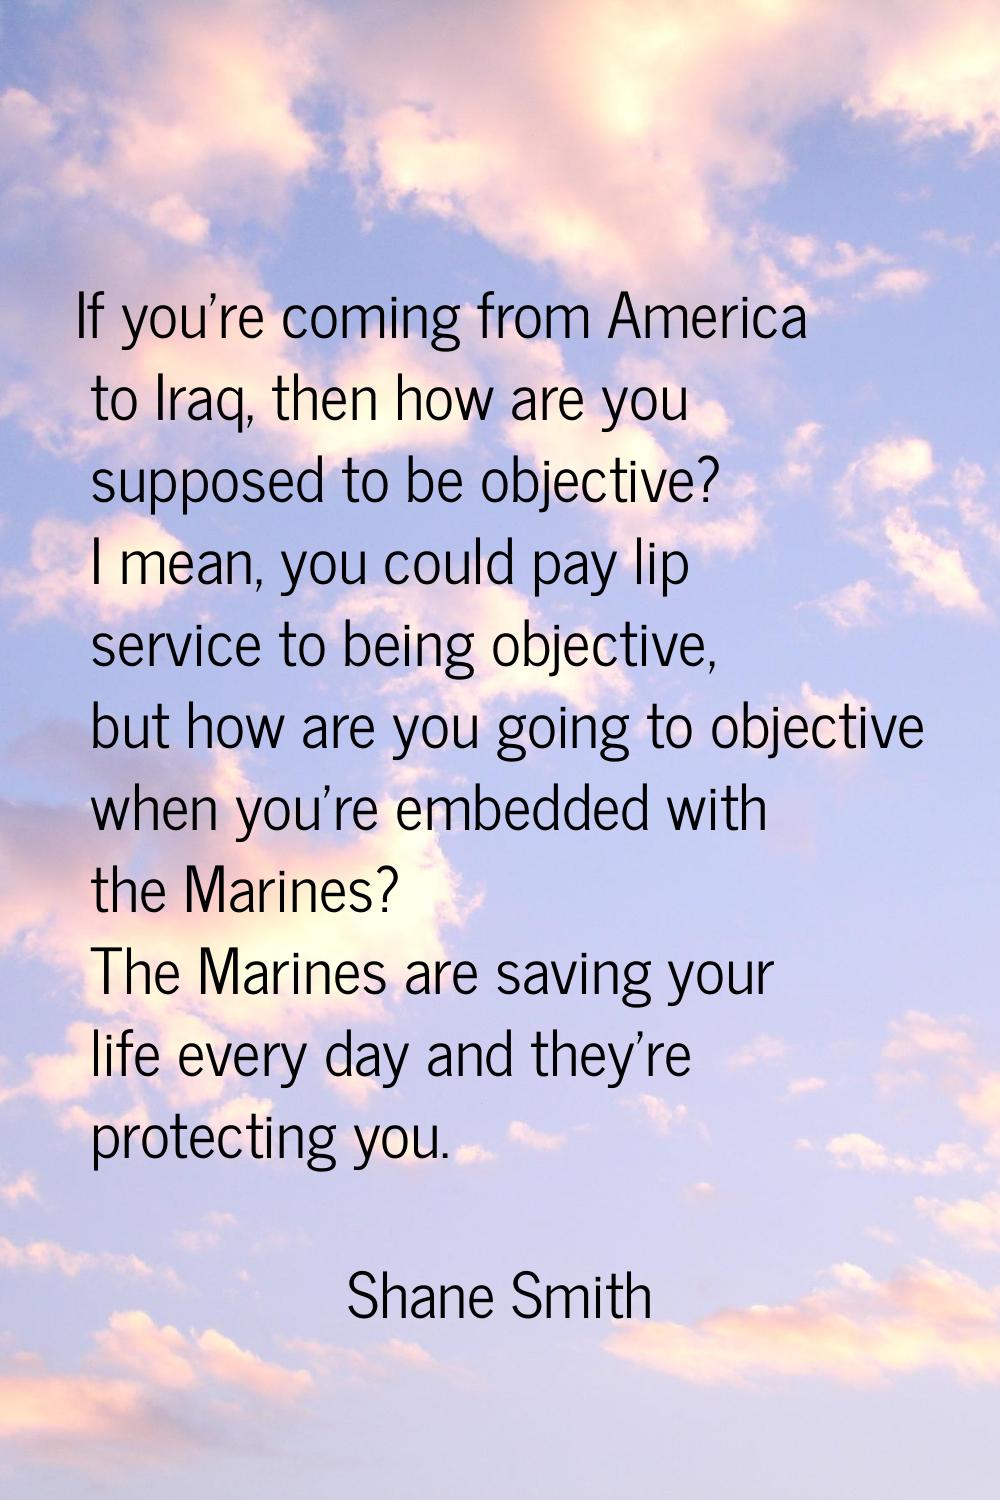 If you're coming from America to Iraq, then how are you supposed to be objective? I mean, you could